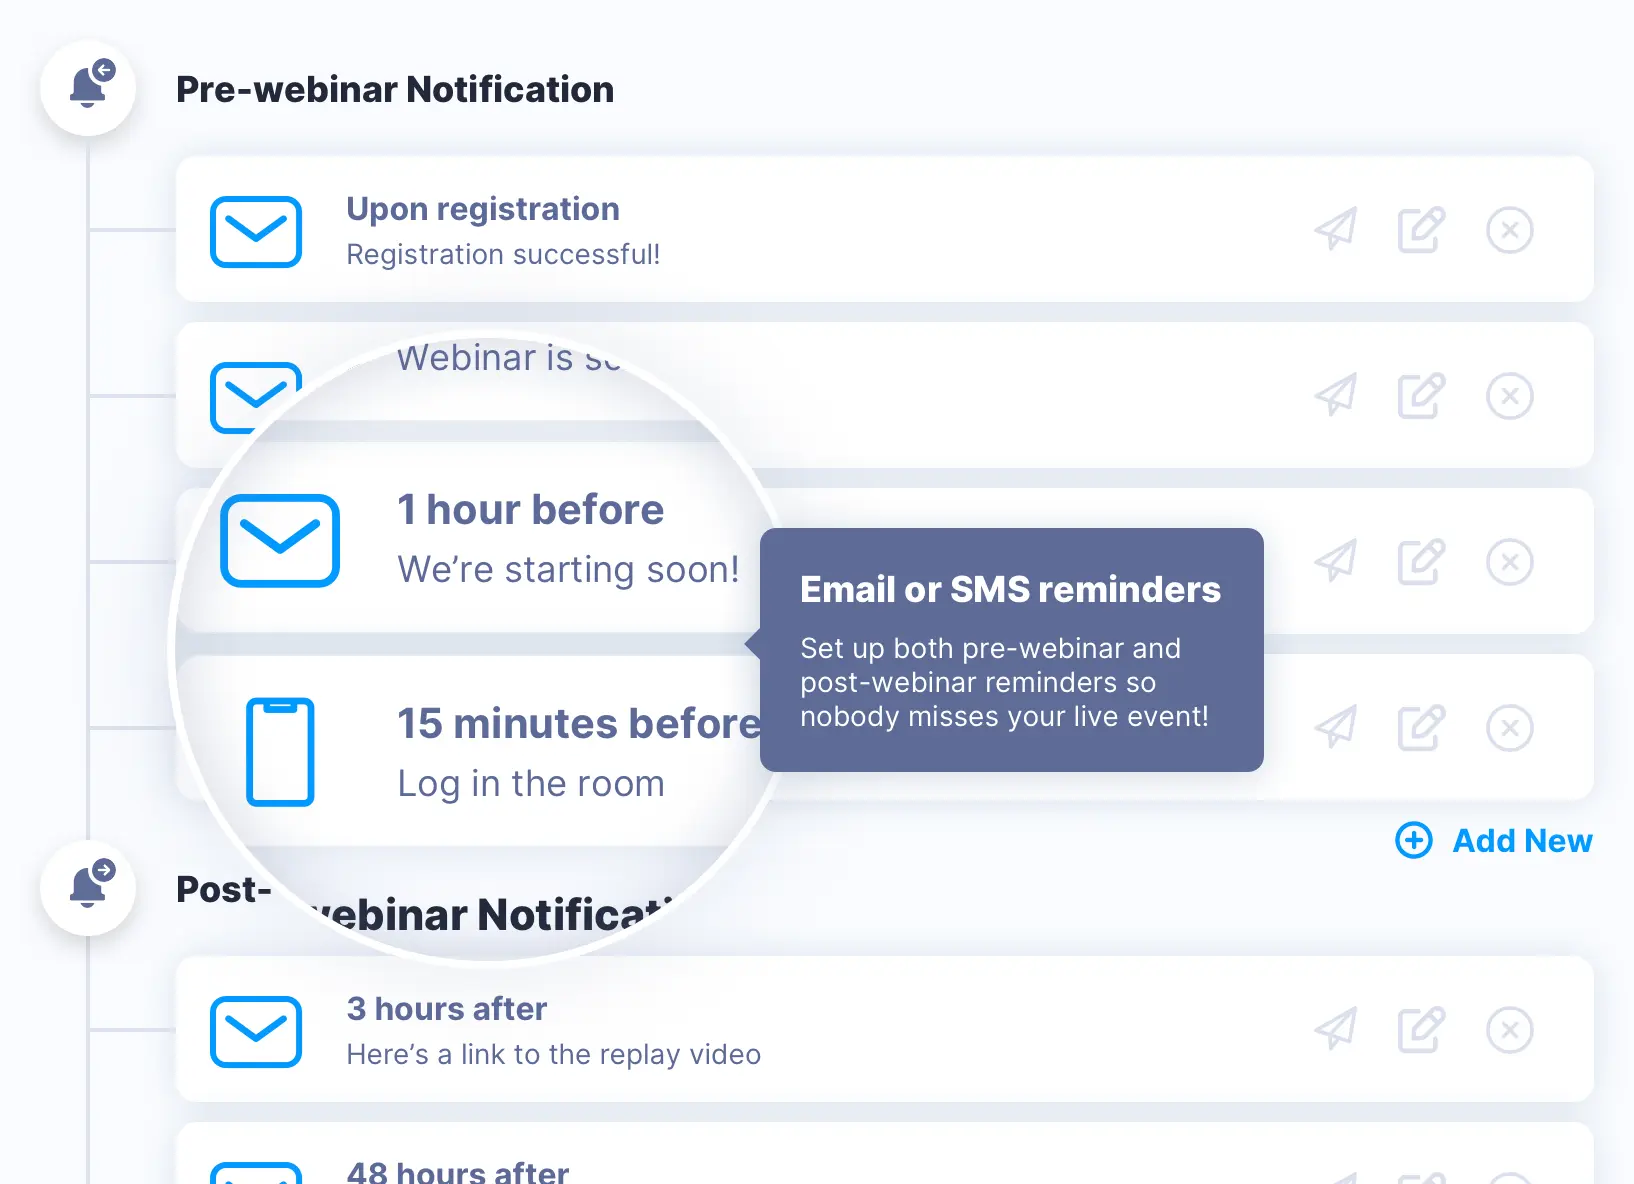 Full Email & SMS System - EverWebinar allows you to schedule a series of reminder notifications, both via email and phone text, so your registrants never miss your events!